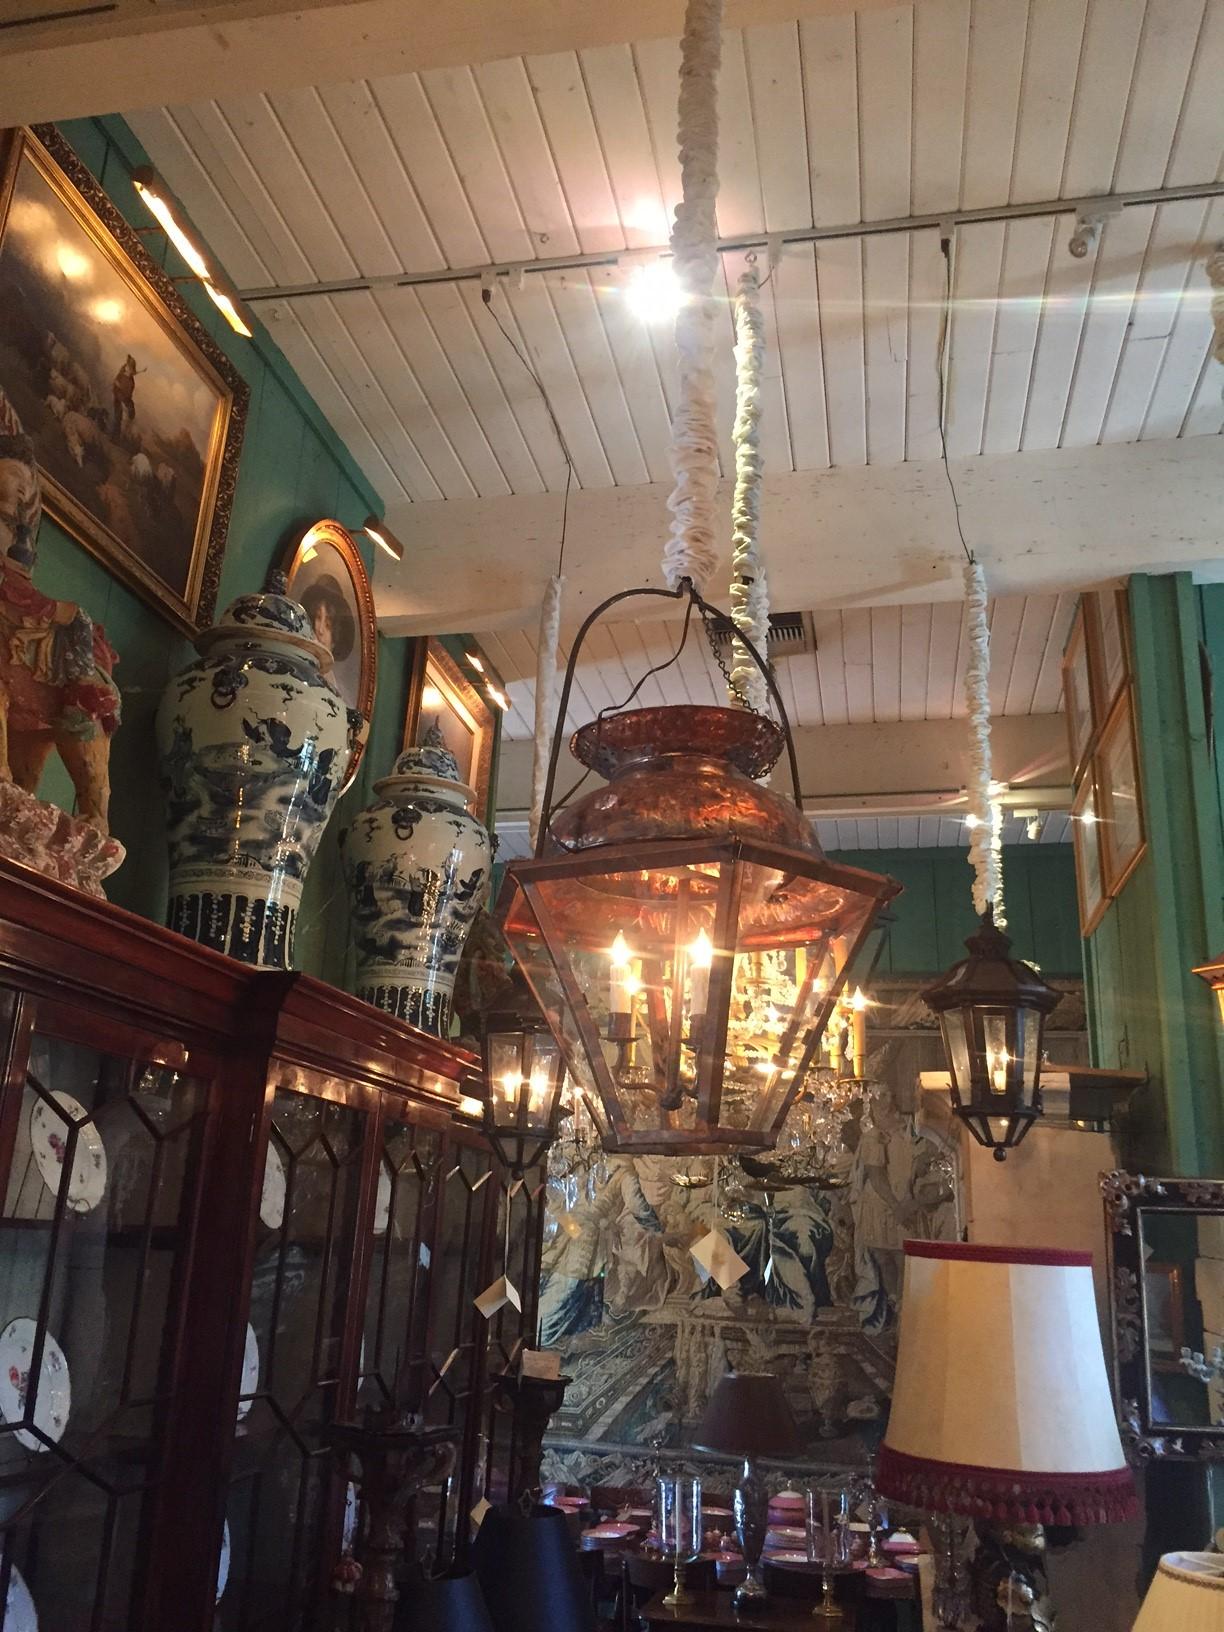 This charming large 17th-18th century Classic Louis XIV style antique look hanging copper lantern features a tiered top with a Lid that opens and close. La Maison Iron Work. The bracket that holds the Lantern in place if you have a windy exterior